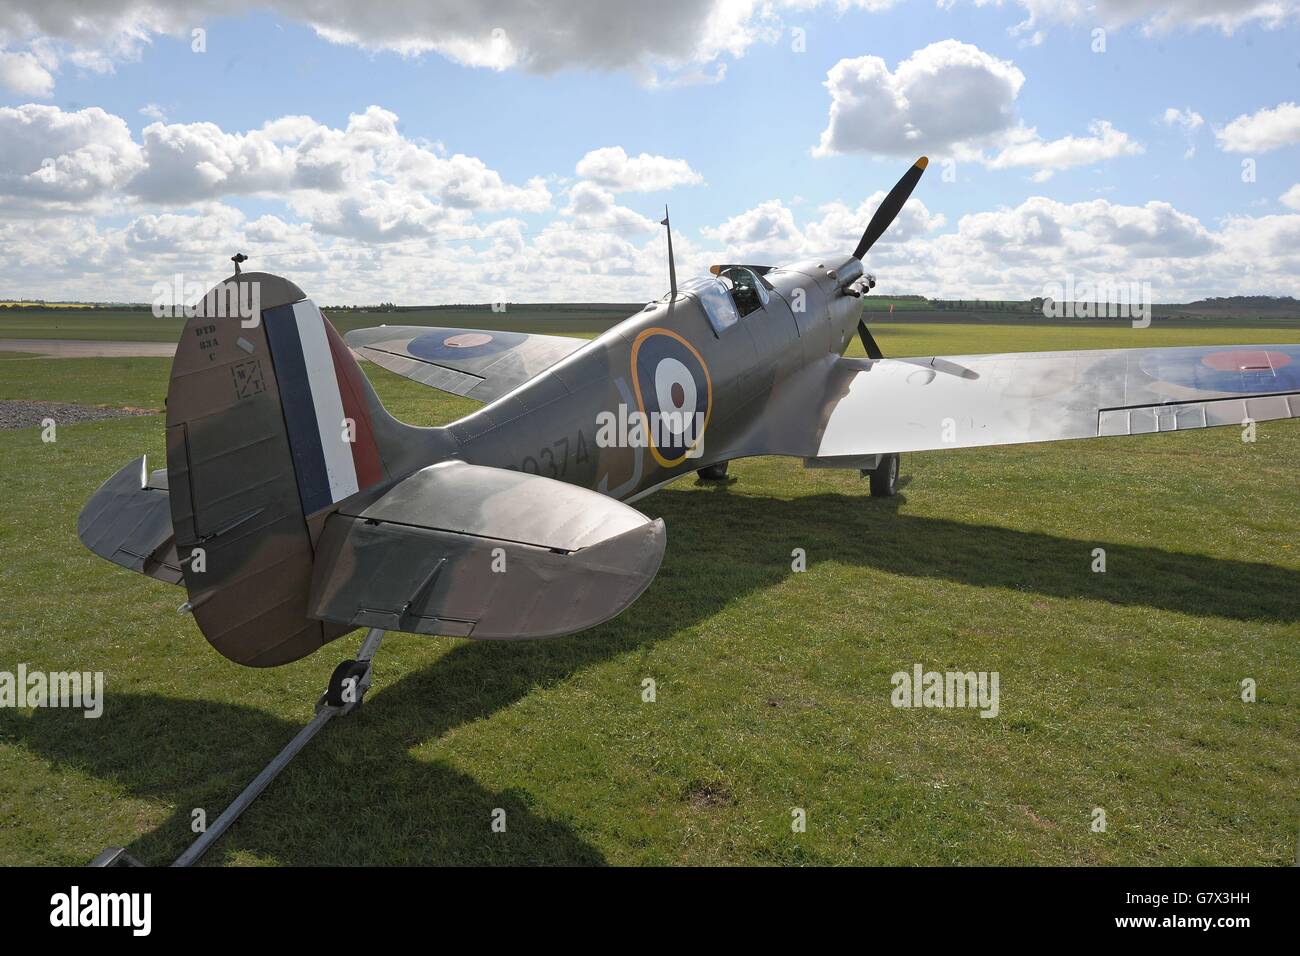 Mark 1 Spitfire High Resolution Stock Photography and Images - Alamy